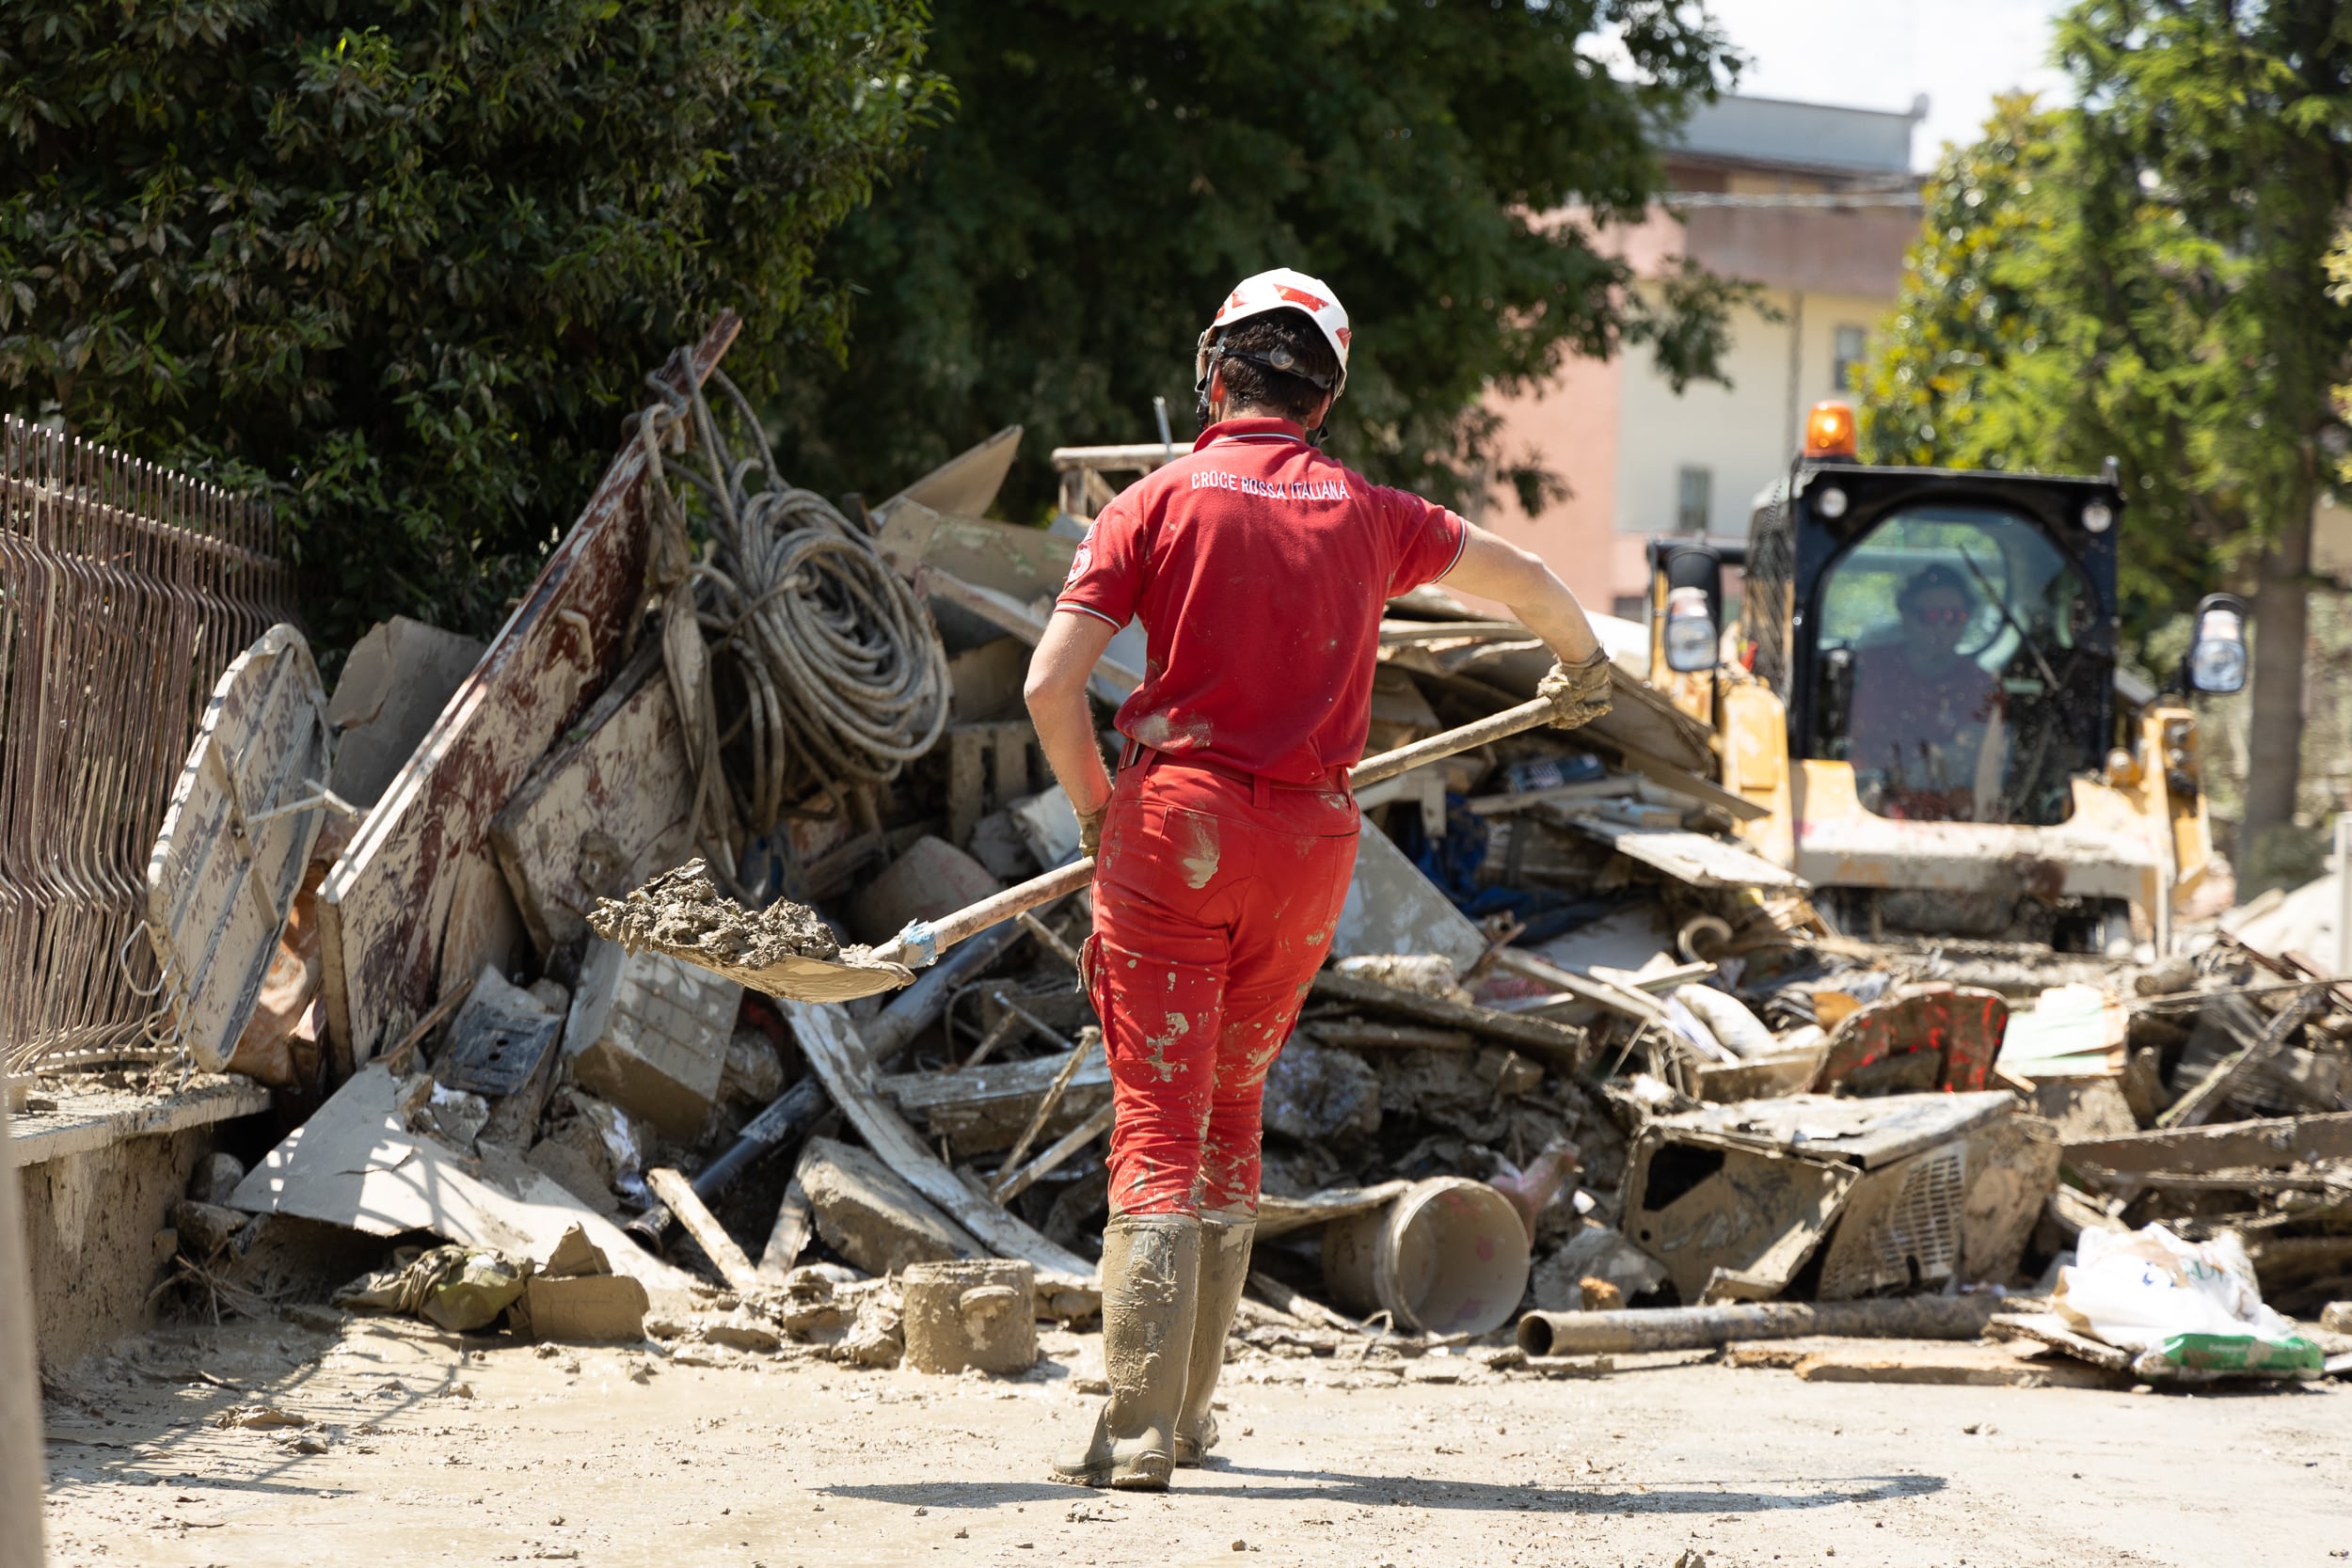 A red cross worker wearing red pants, a red shirt, a helmet and gumboots walks on street with a shovel towards a large pile of flood debris.